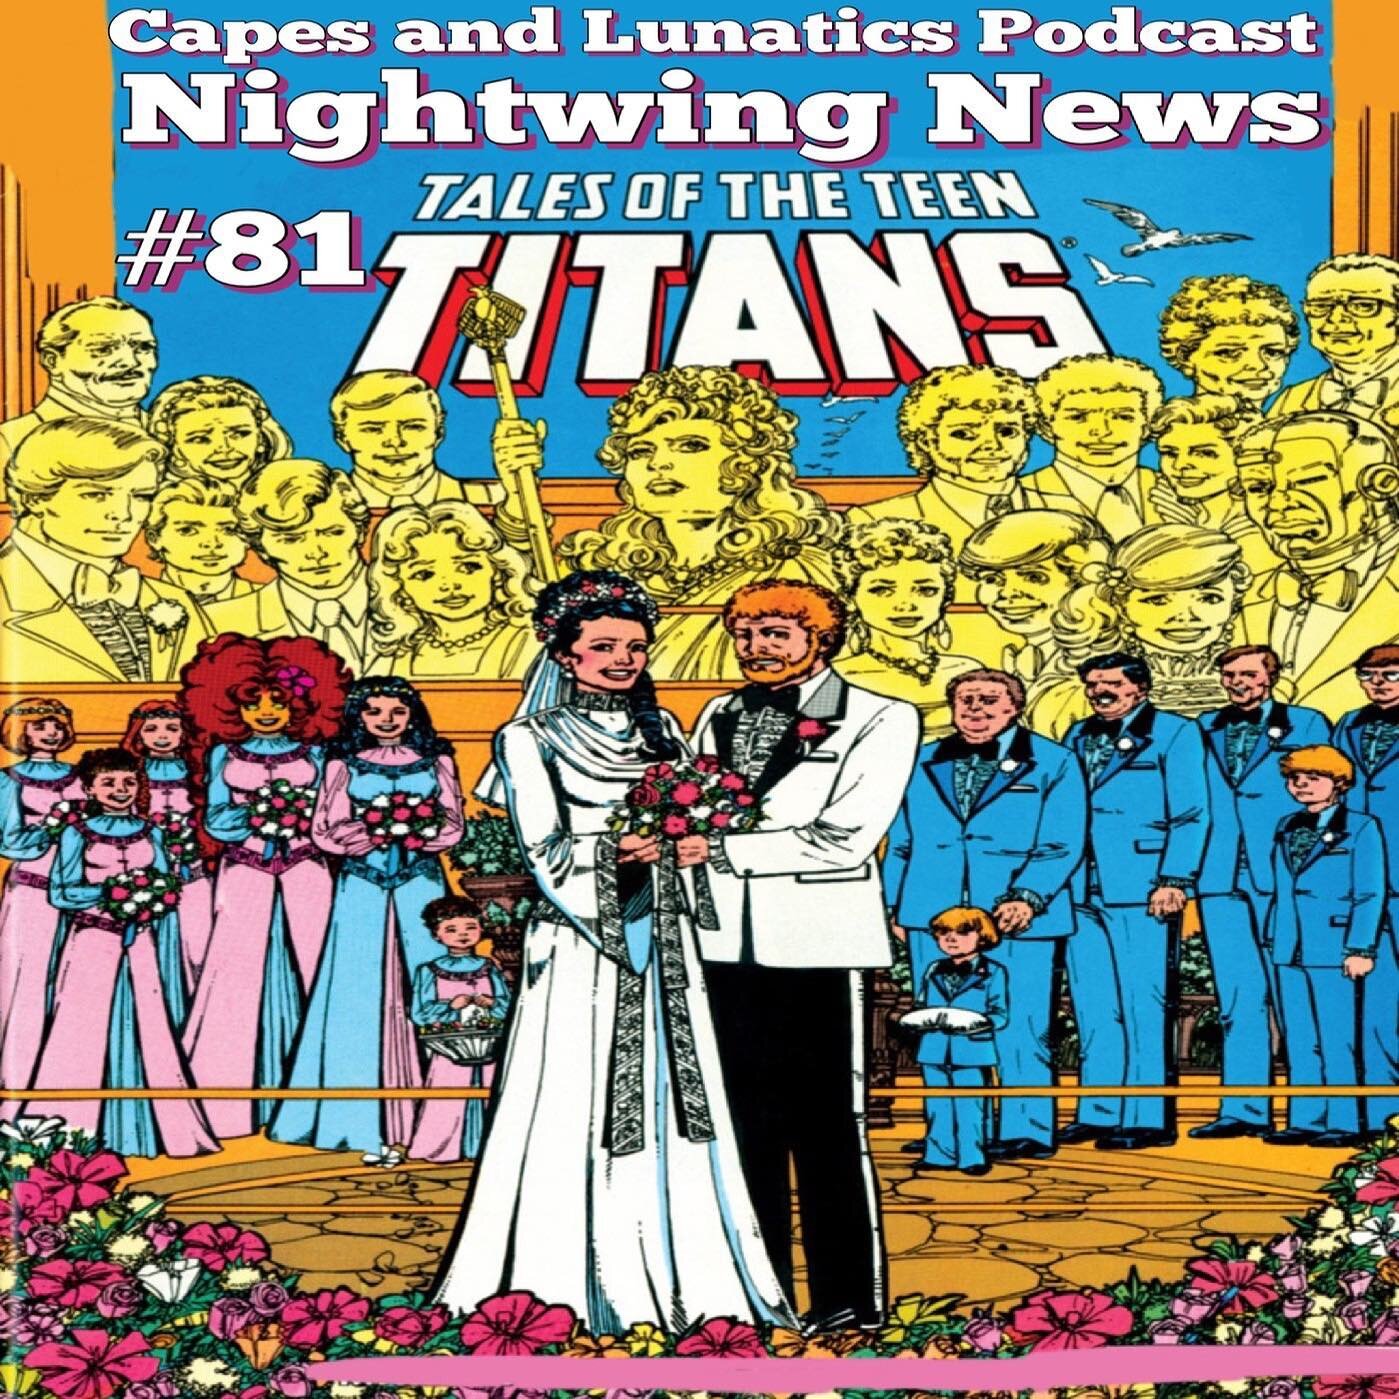 #nightwing news #podcast episode #81!  @nightwingpdp and Kristen Geaman discuss #talesoftheteentitans #50 featuring the #wedding of #donnatroy ! Check it out on our #youtubechannel or anywhere you download podcasts (link in bio) #libsyn #itunes #appl